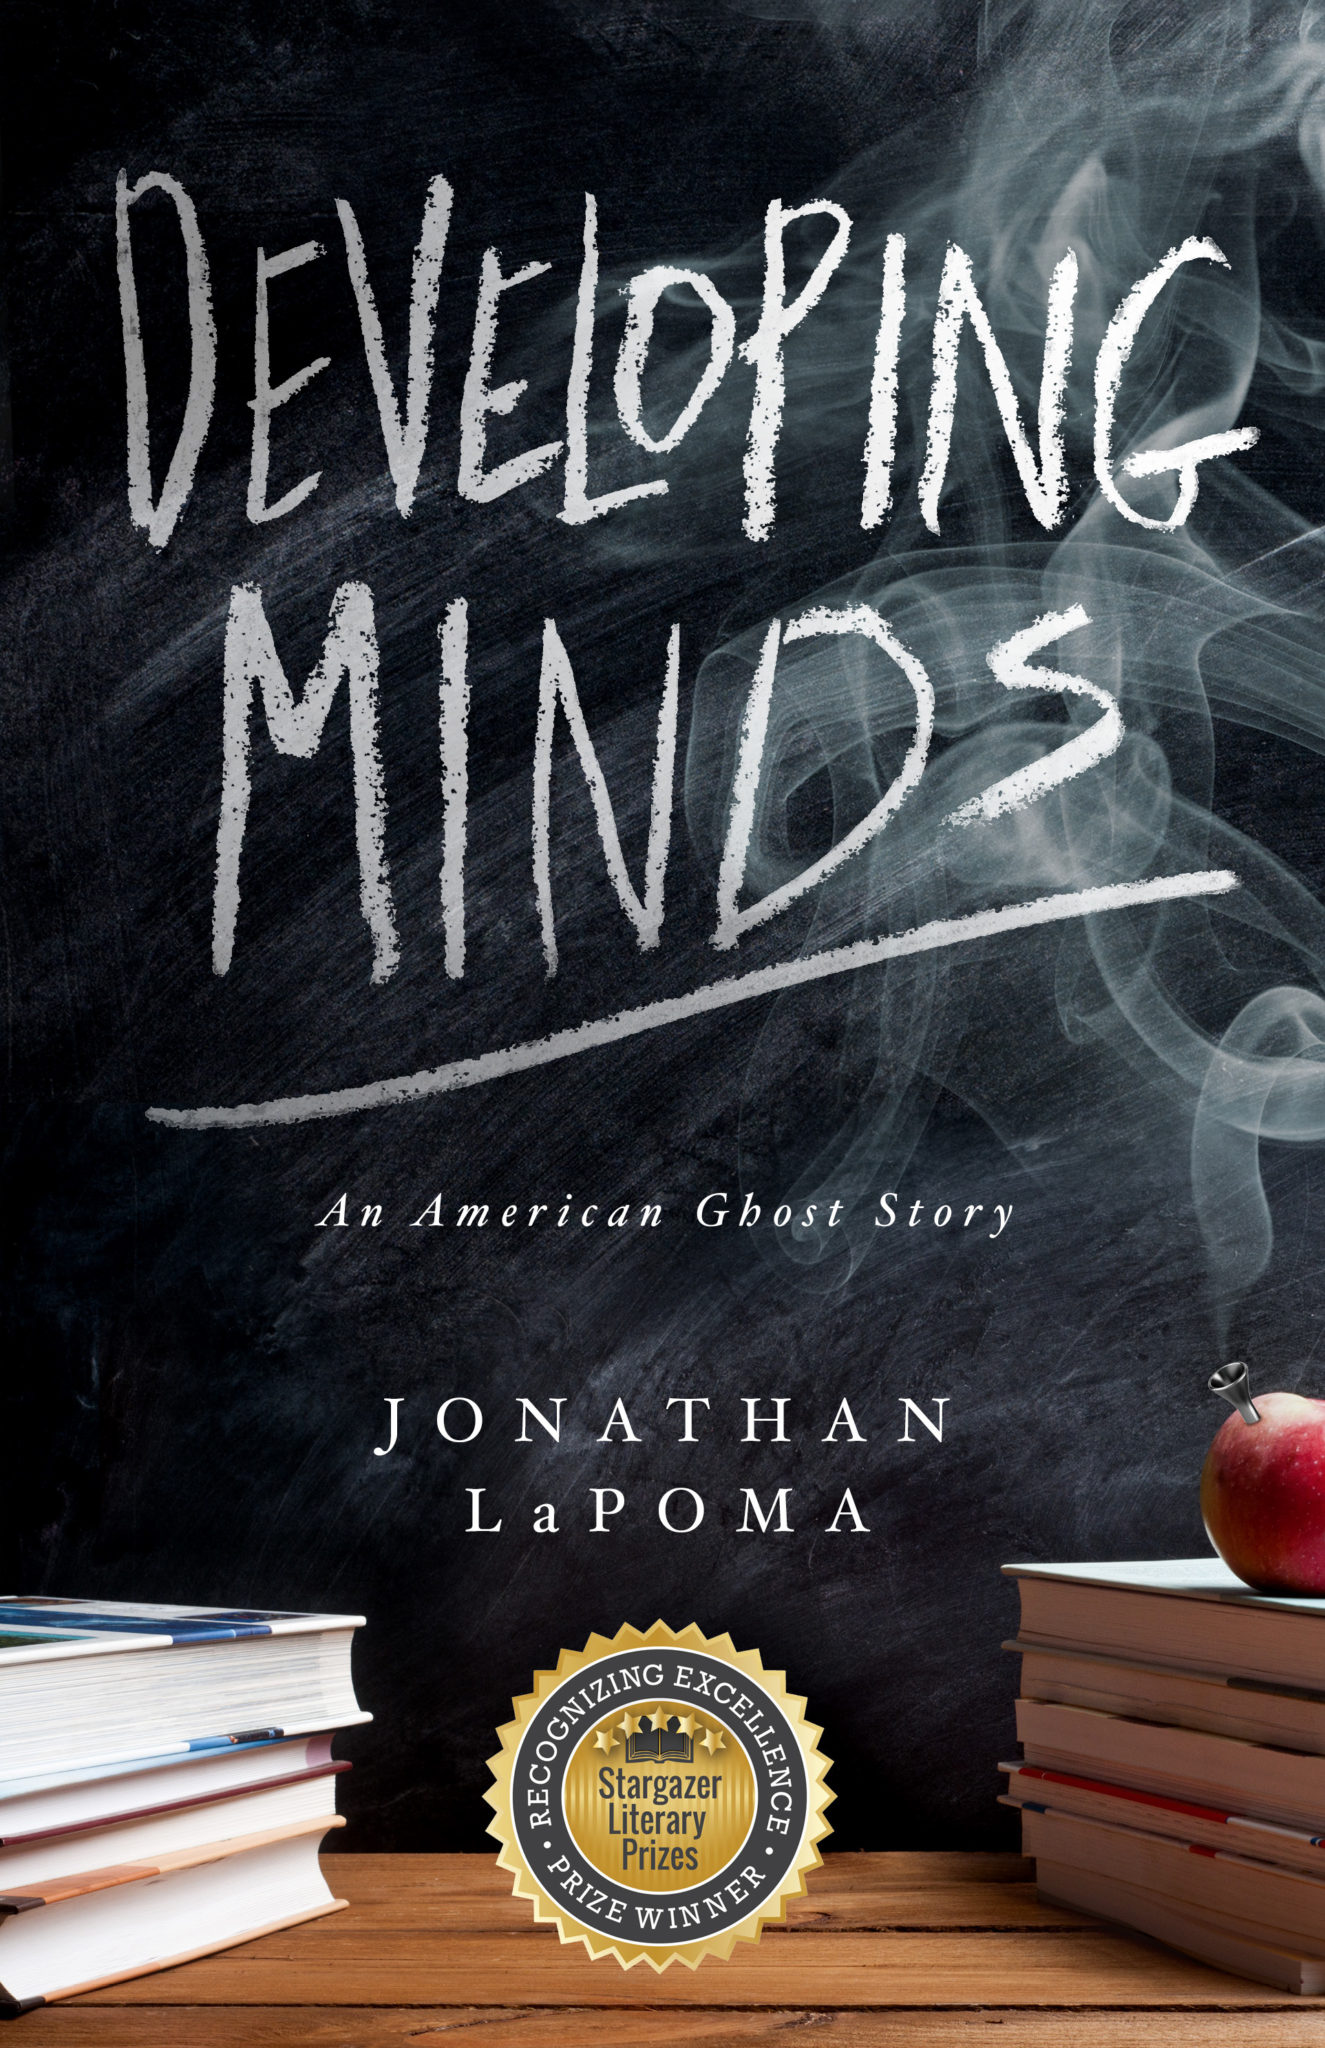 FREE: Developing Minds: An American Ghost Story by Jonathan LaPoma